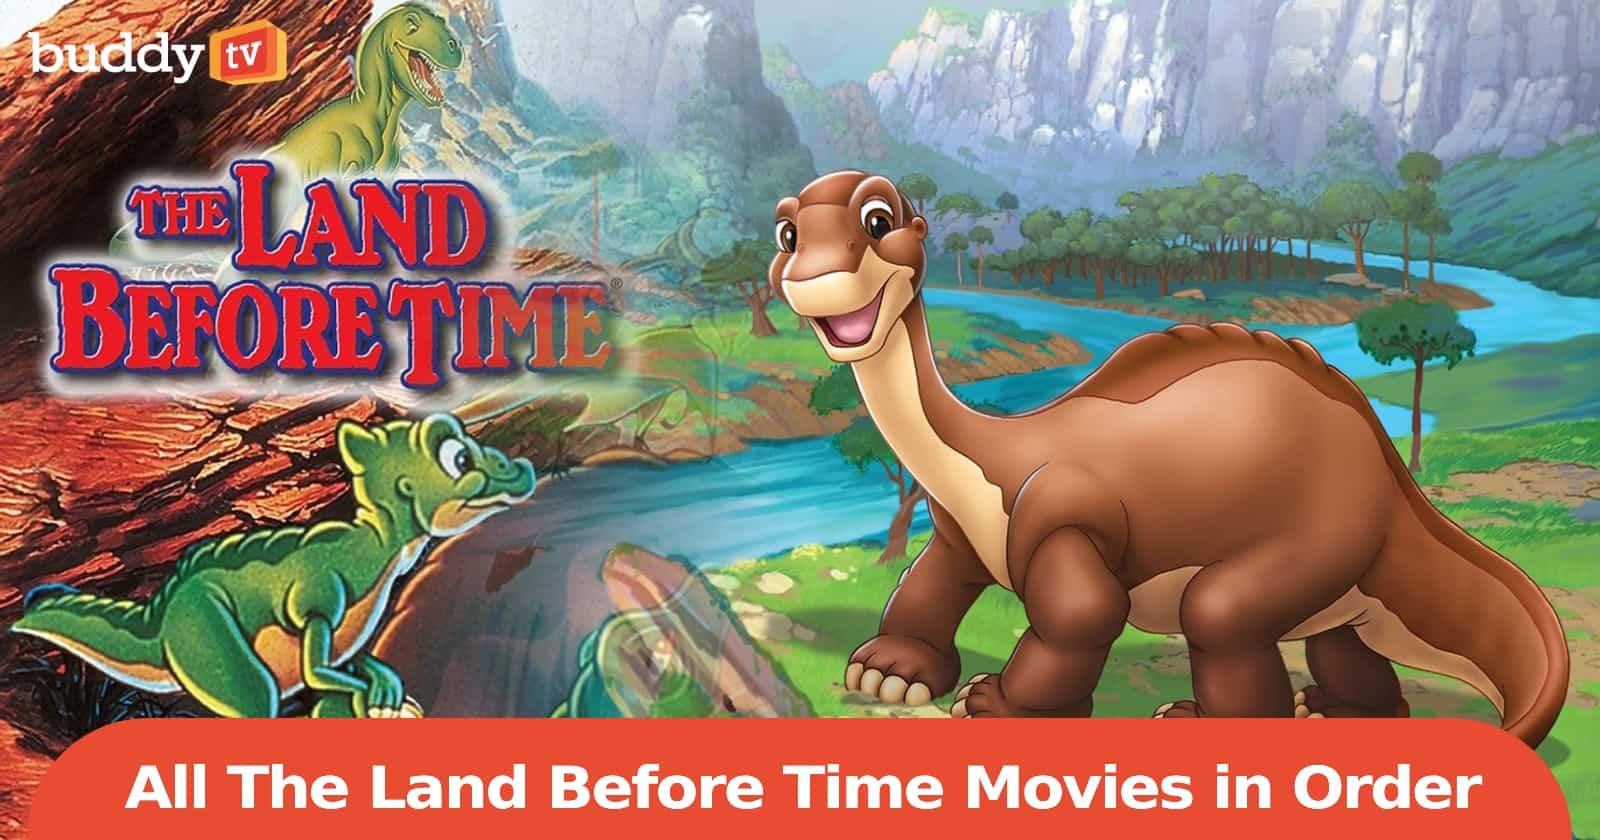 All The Land Before Time Movies in Order